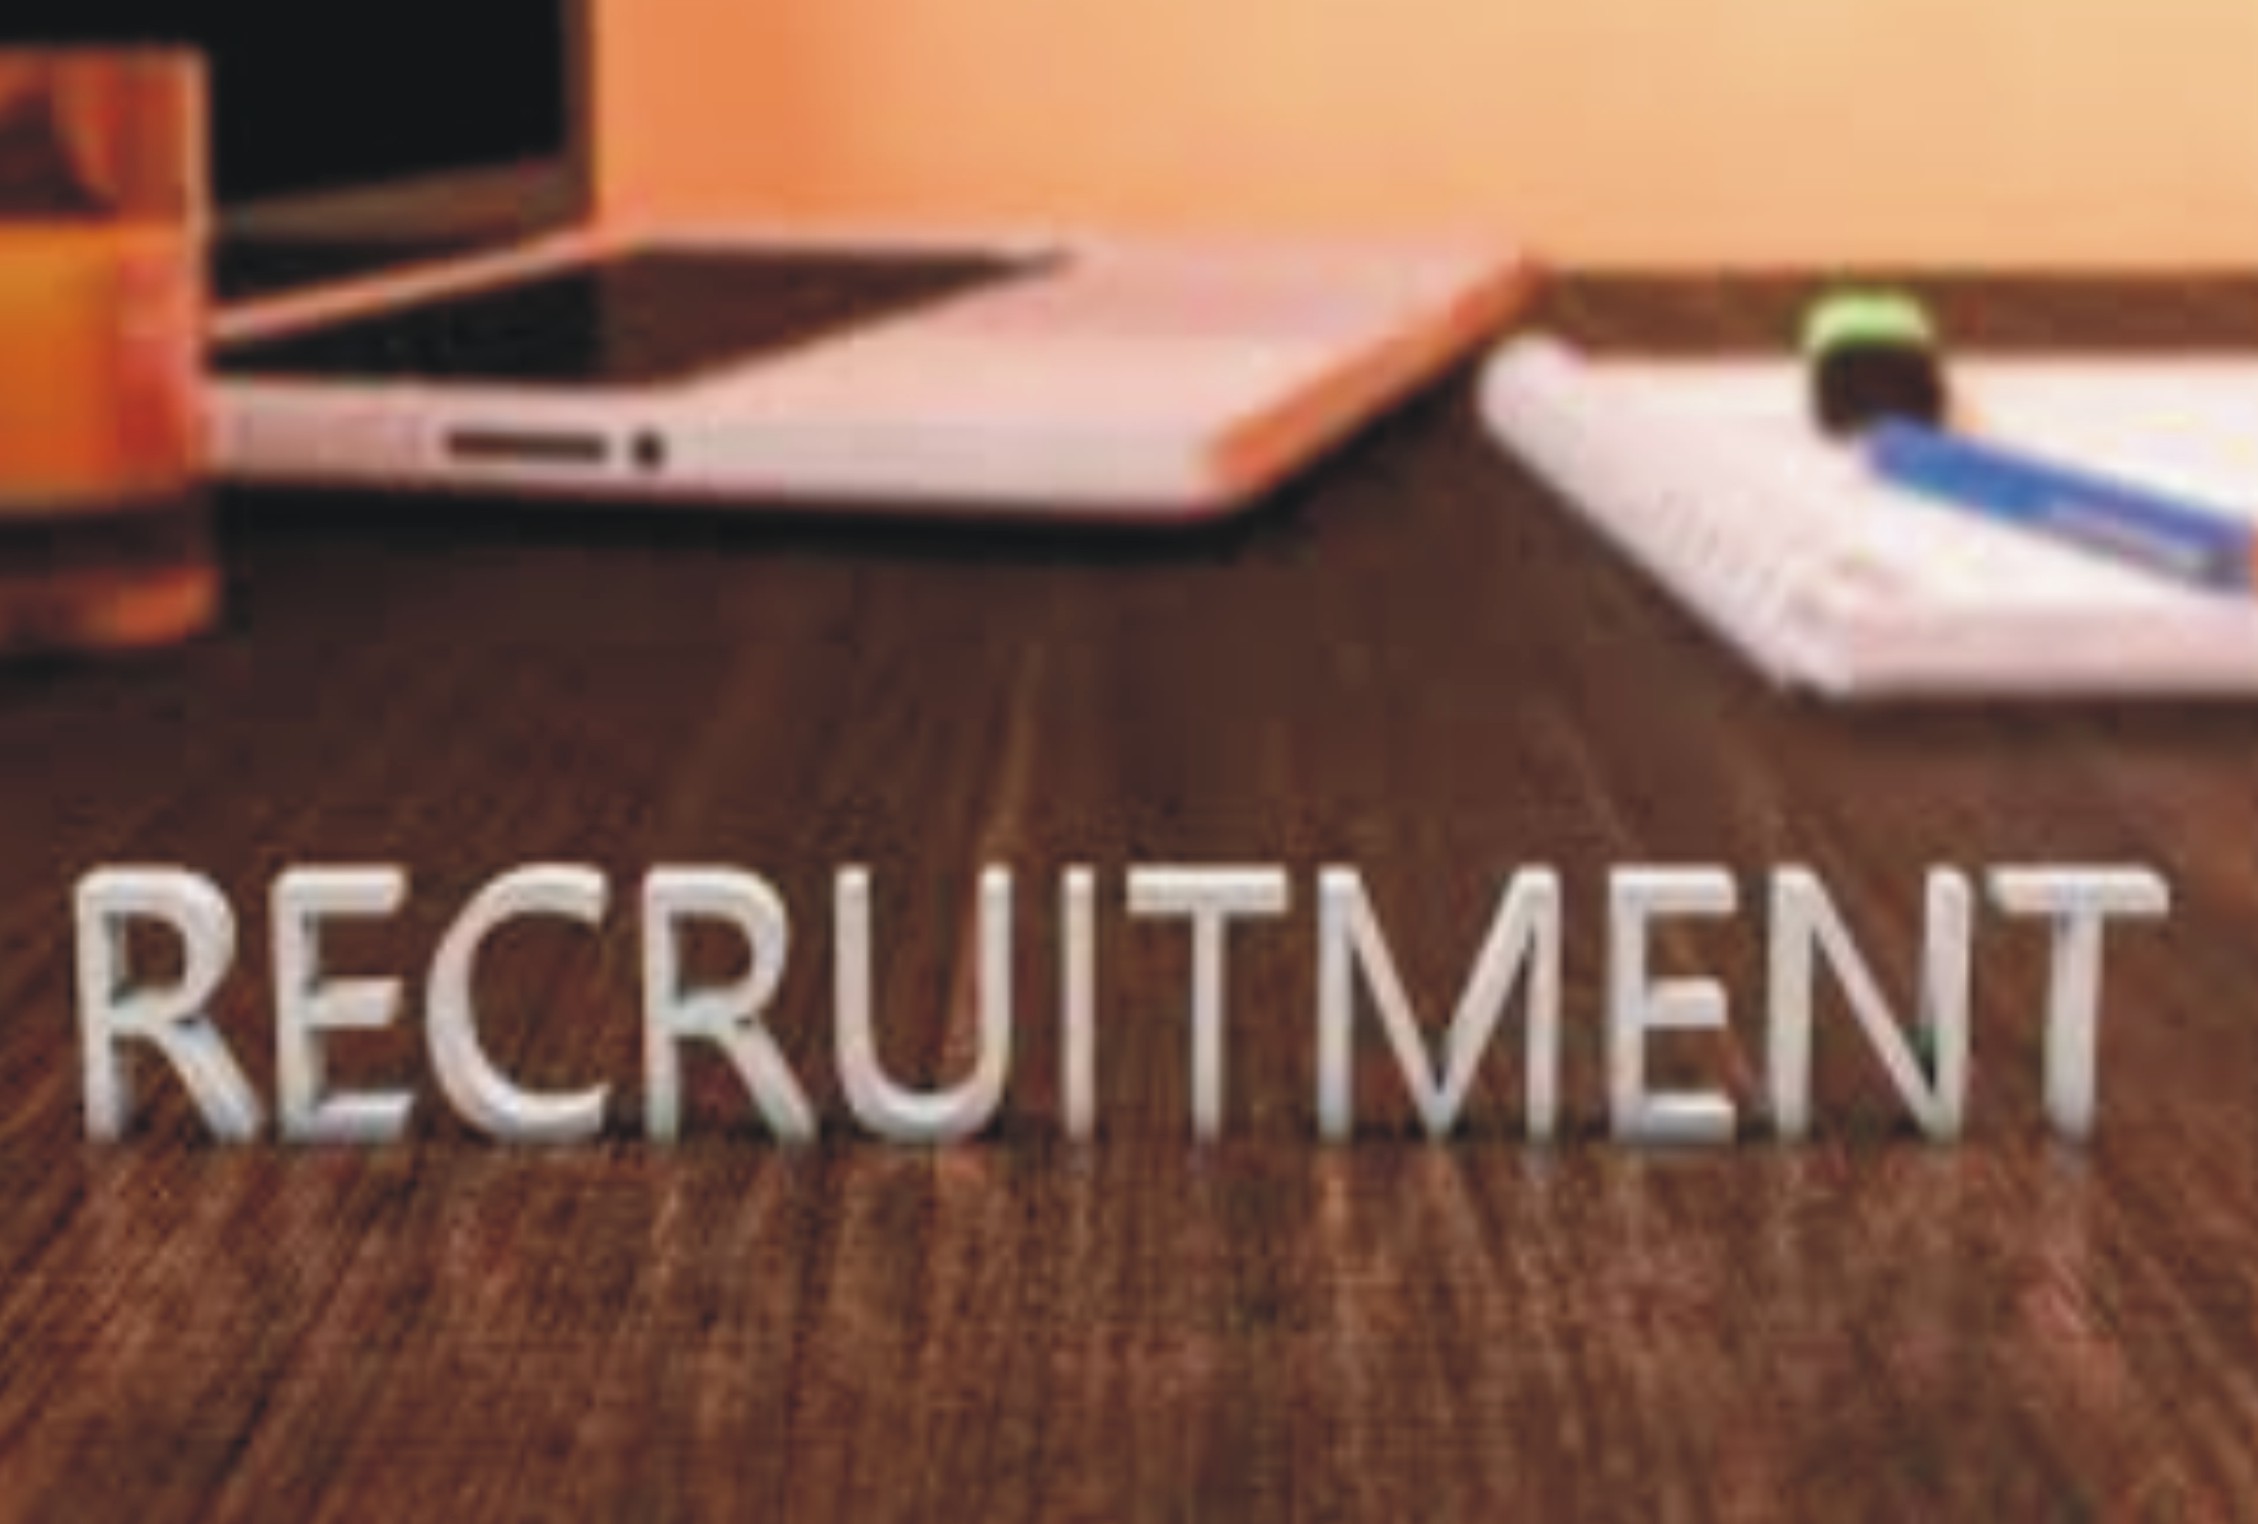 How To Start Recruitment Agency In Nigeria